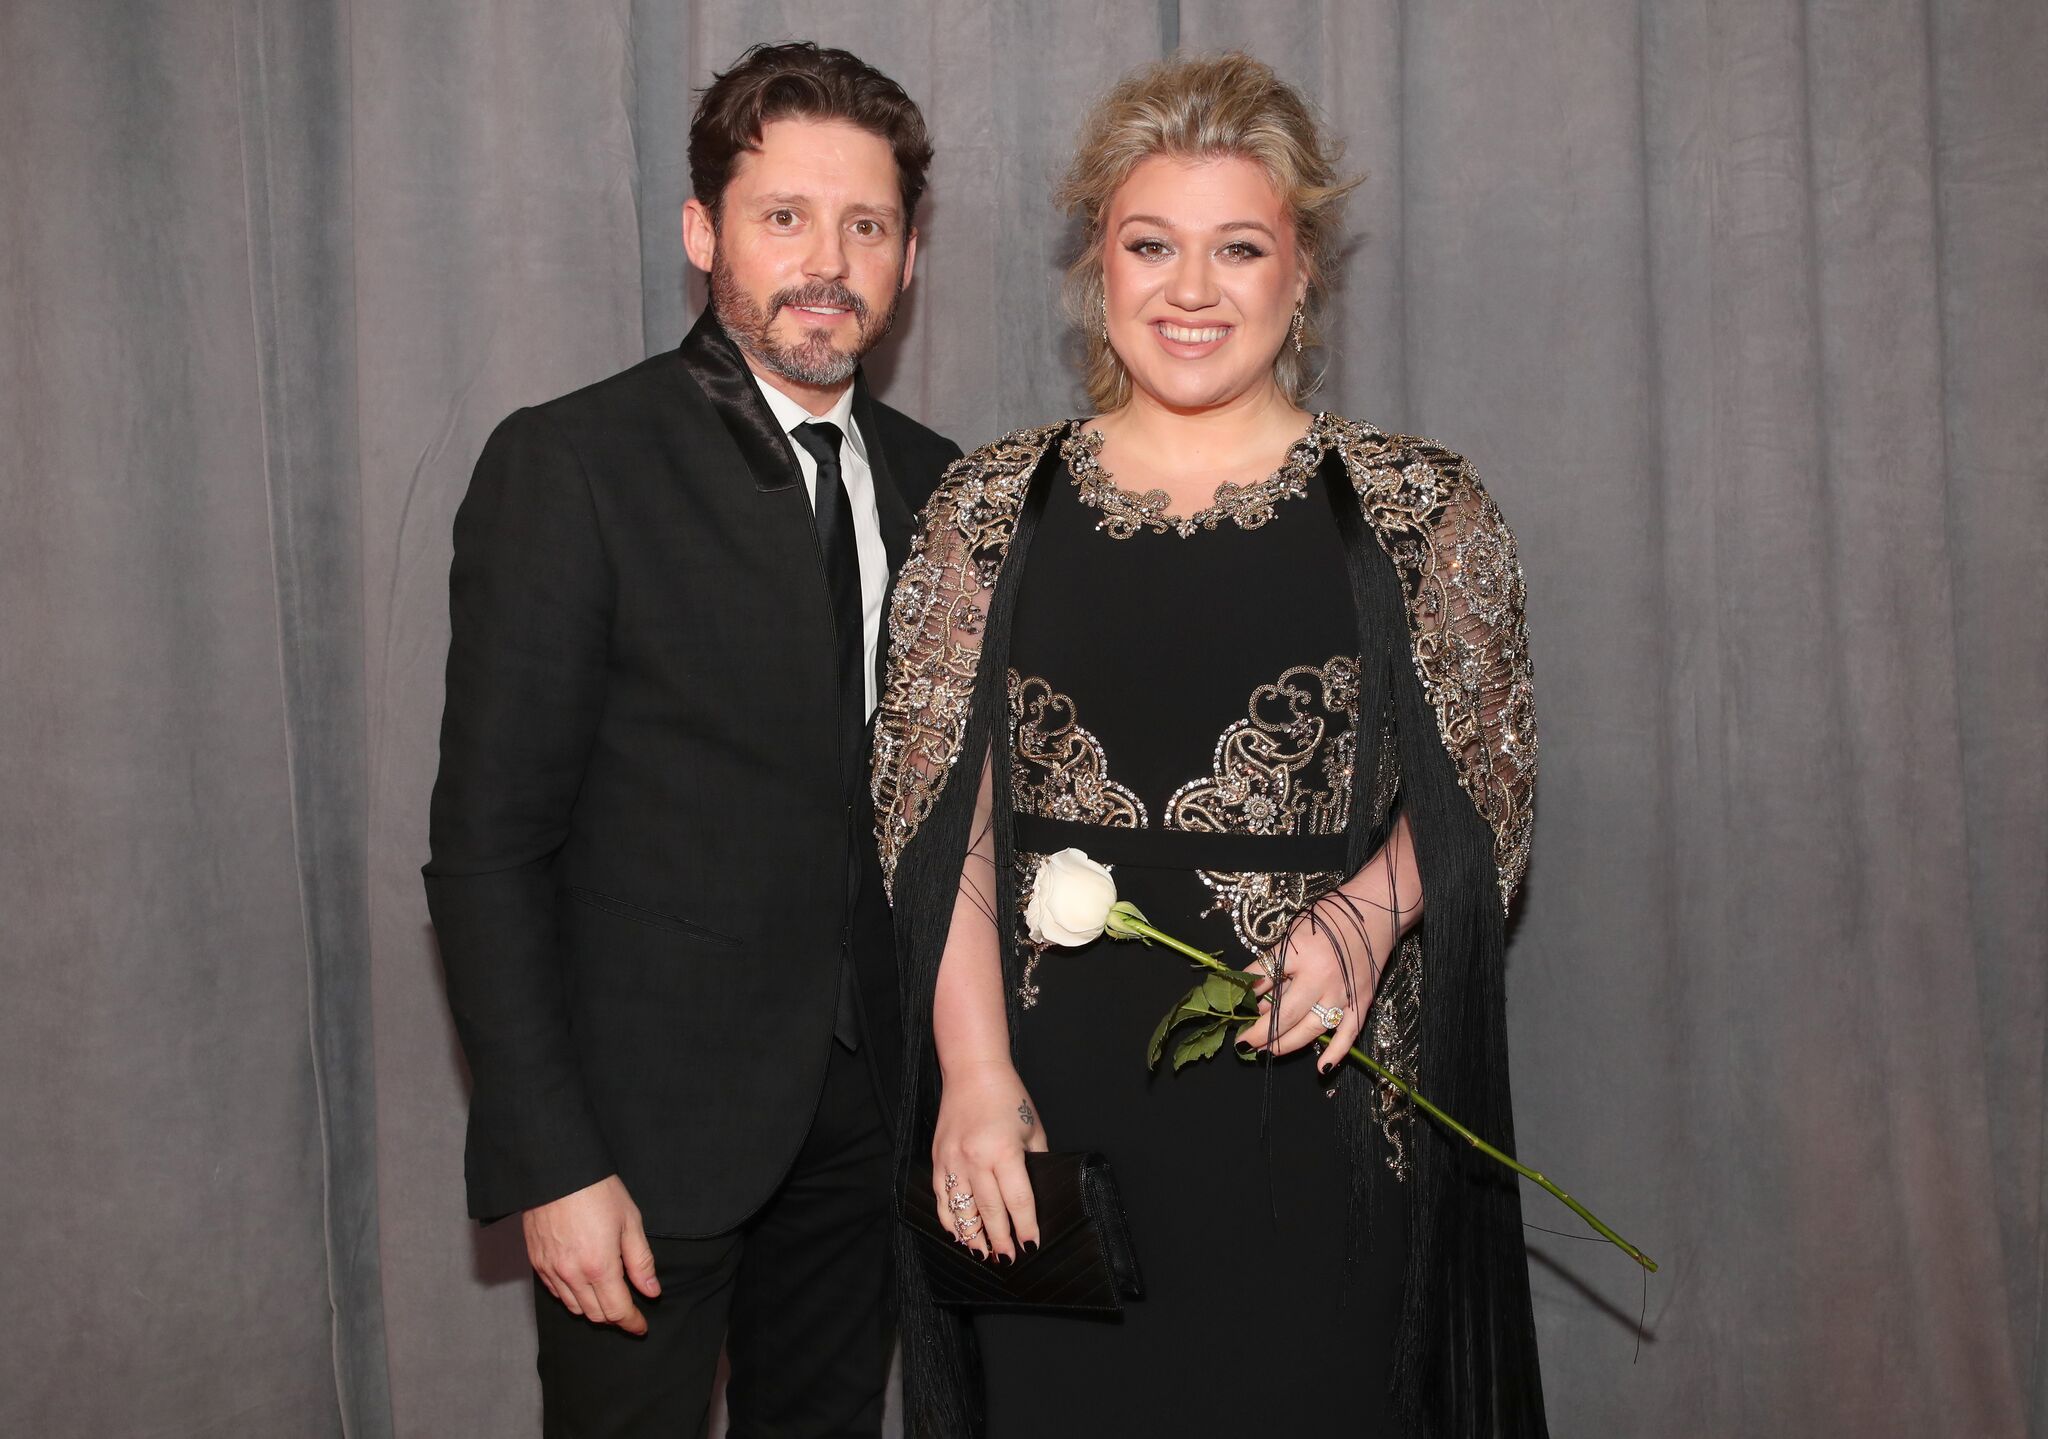 Brandon Blackstock and wife Kelly Clarkson at the 60th Annual GRAMMY Awards on January 28, 2018 | Photo: Getty Images